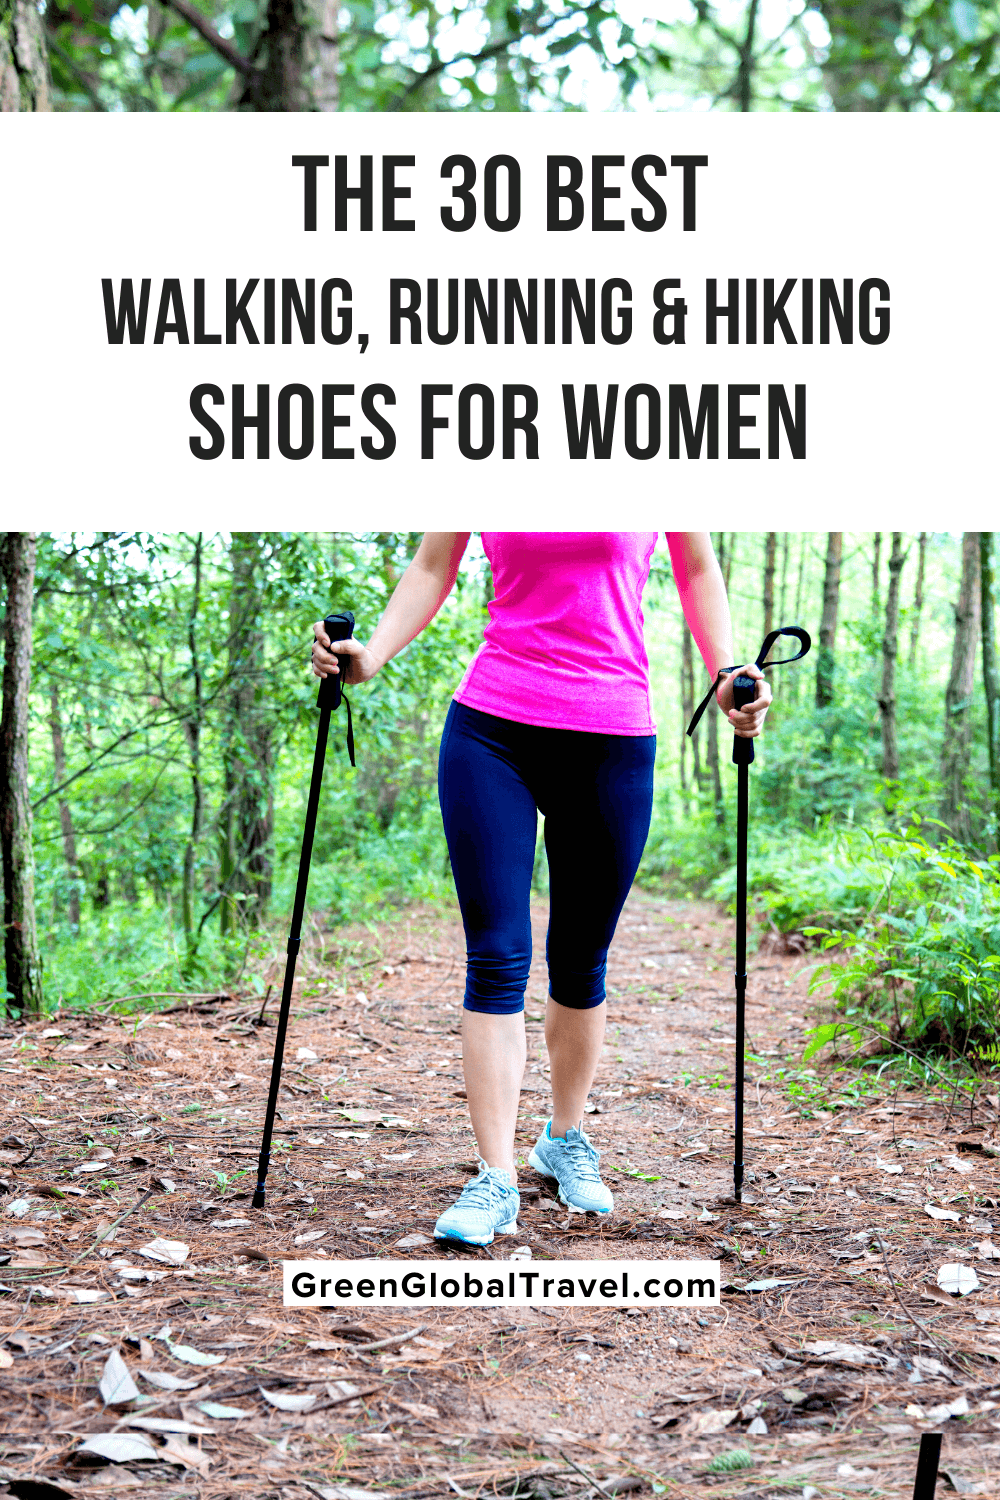 The 30+ best women's hiking, running and walking shoes for 2021, from fun and fashionable to technical shoes designed to conquer any terrain.| womens hiking shoes | ladies walking boots | womens hiking boots | womens waterproof walking boots | womens walking shoes | ladies walking shoes | best sneakers for walking | women's walking shoes with arch support | walking sneakers | cushion walk shoes | ladies waterproof walking shoes | best trail running shoes for women | trail shoes women |